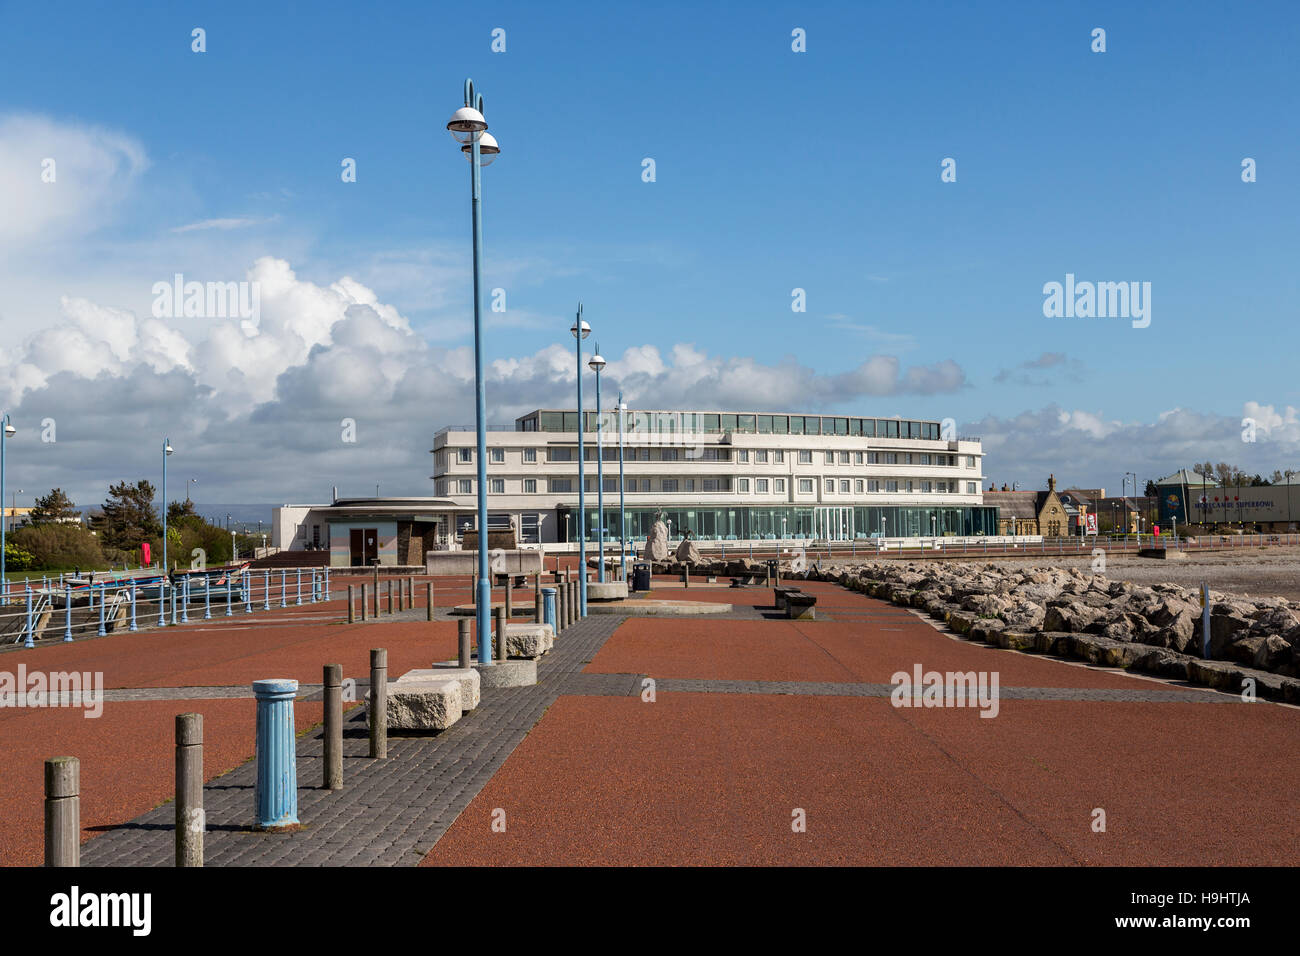 Sea front buildings from promenade on jetty, Morecambe, England, UK Stock Photo